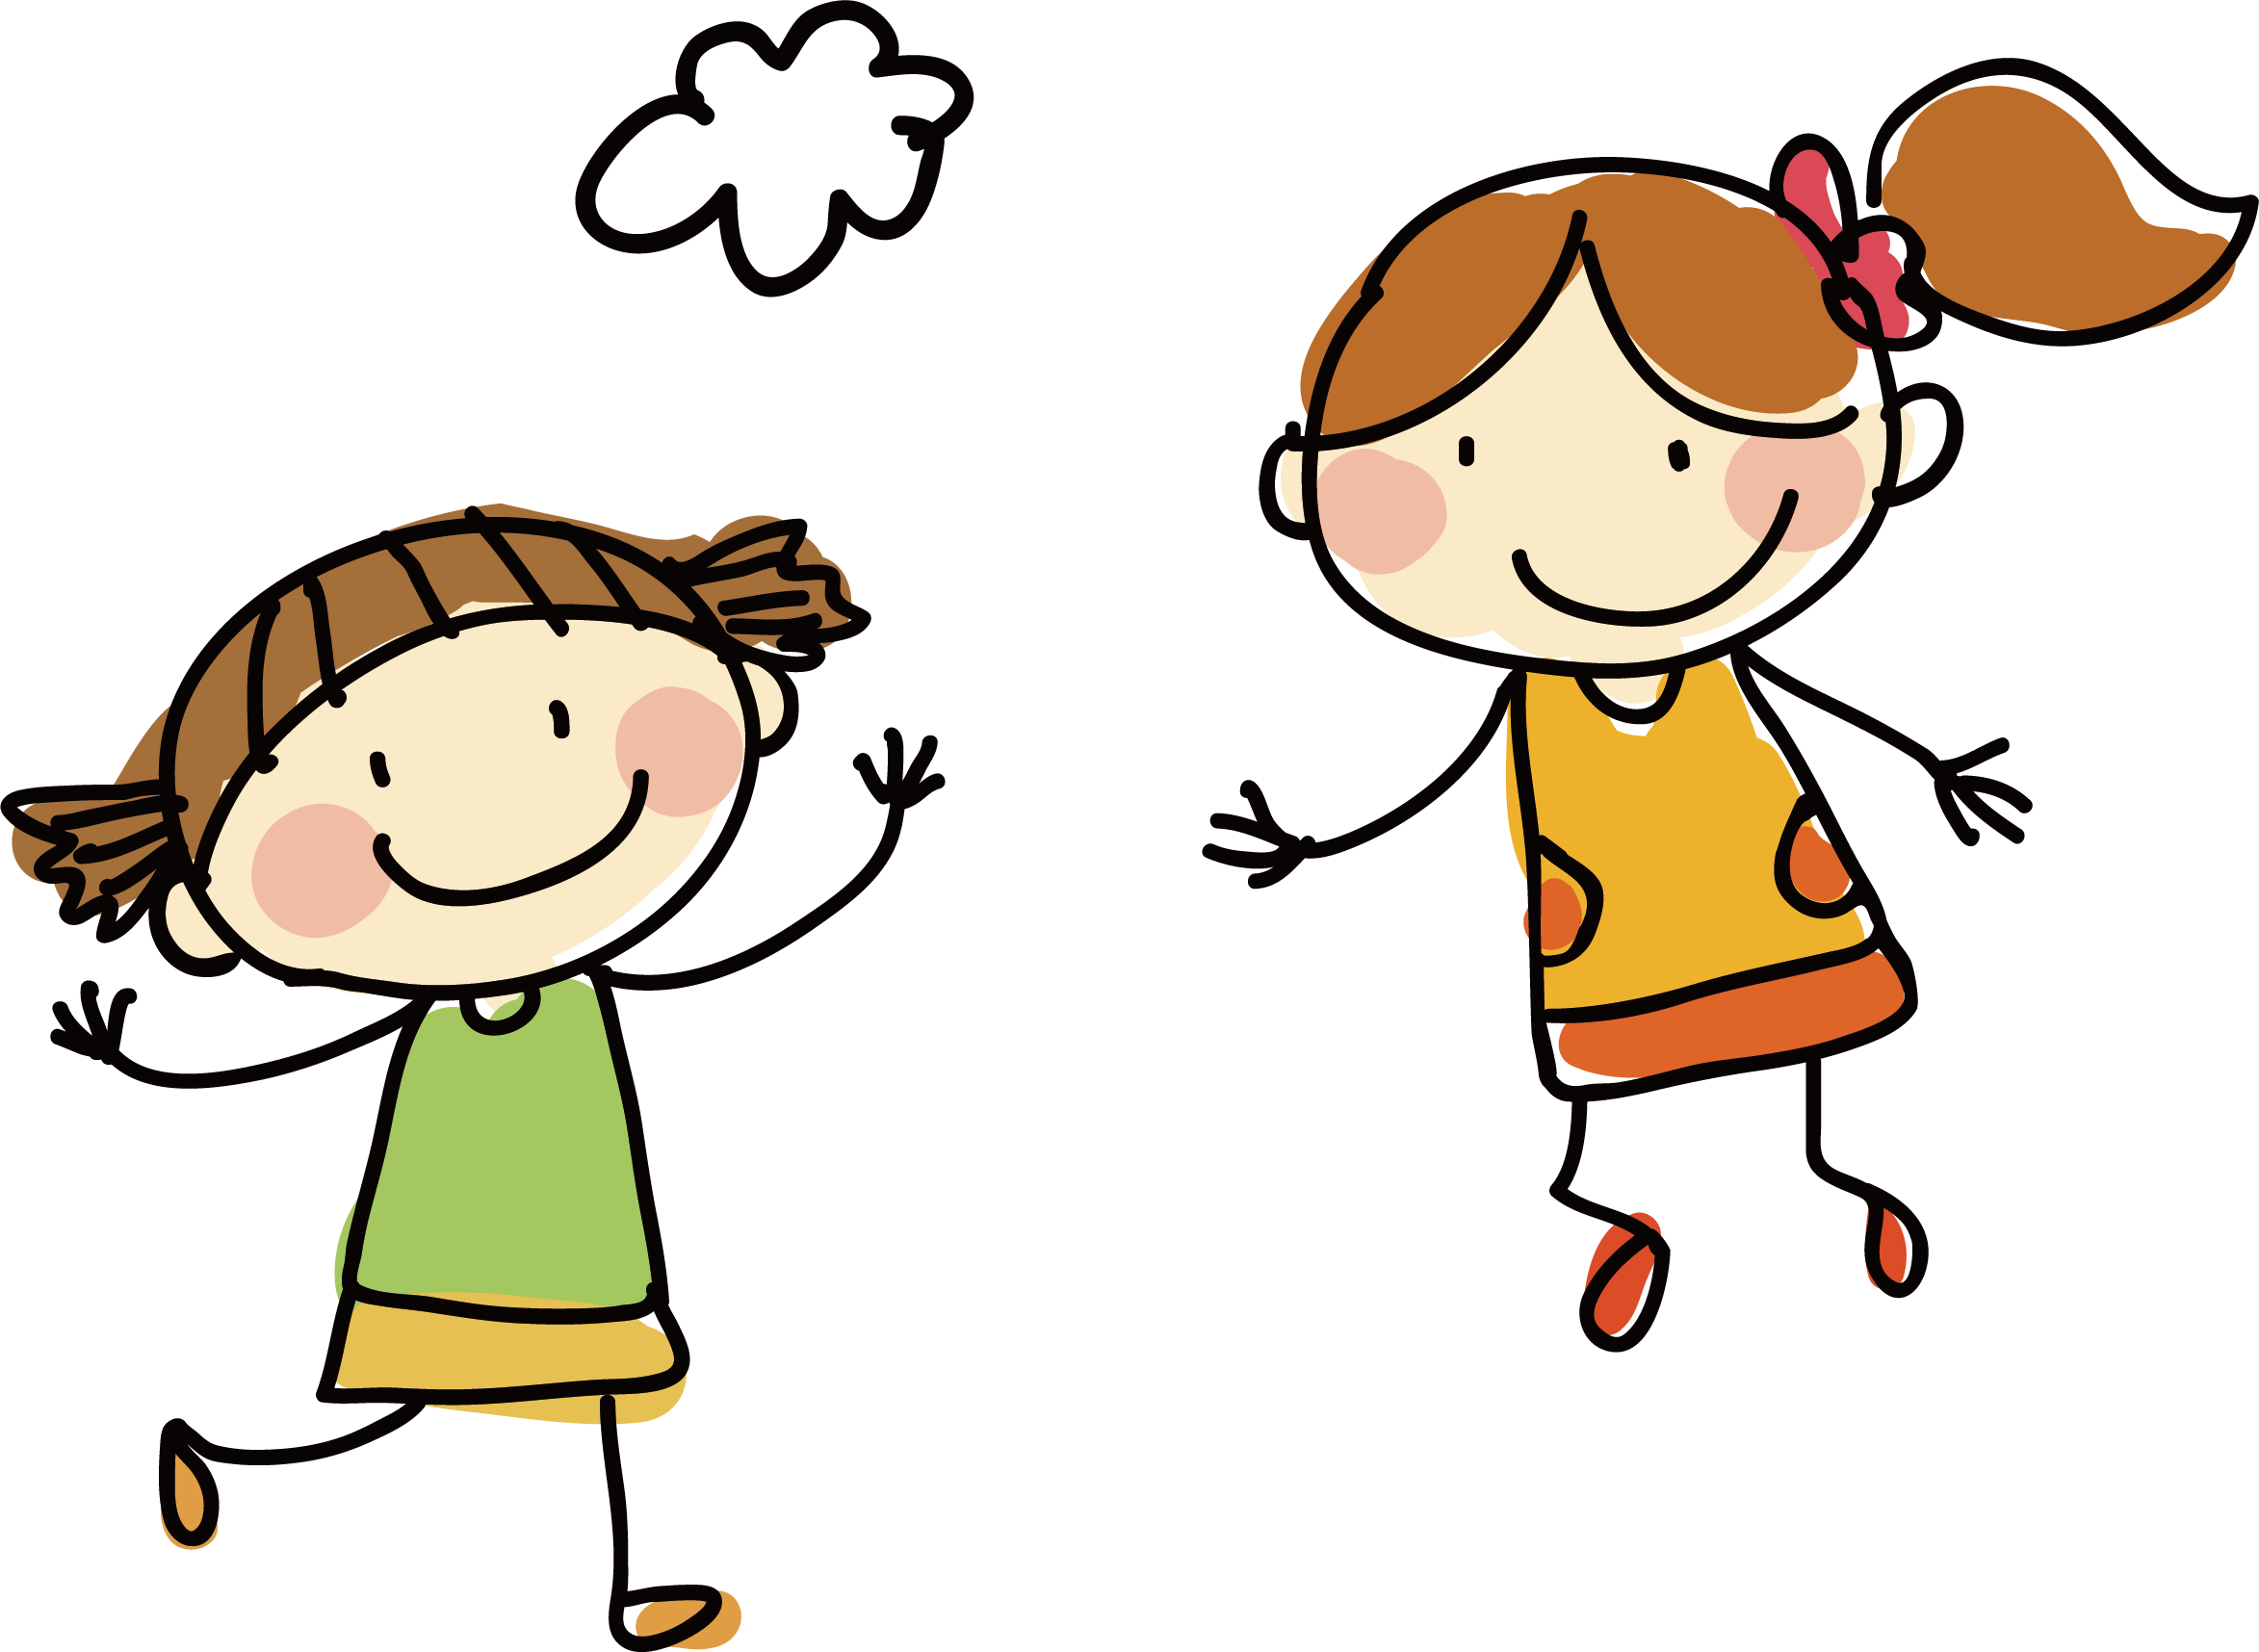 Child Friendship Nursery Rhyme - Happy Children Animated - (2346x1716) Png  Clipart Download